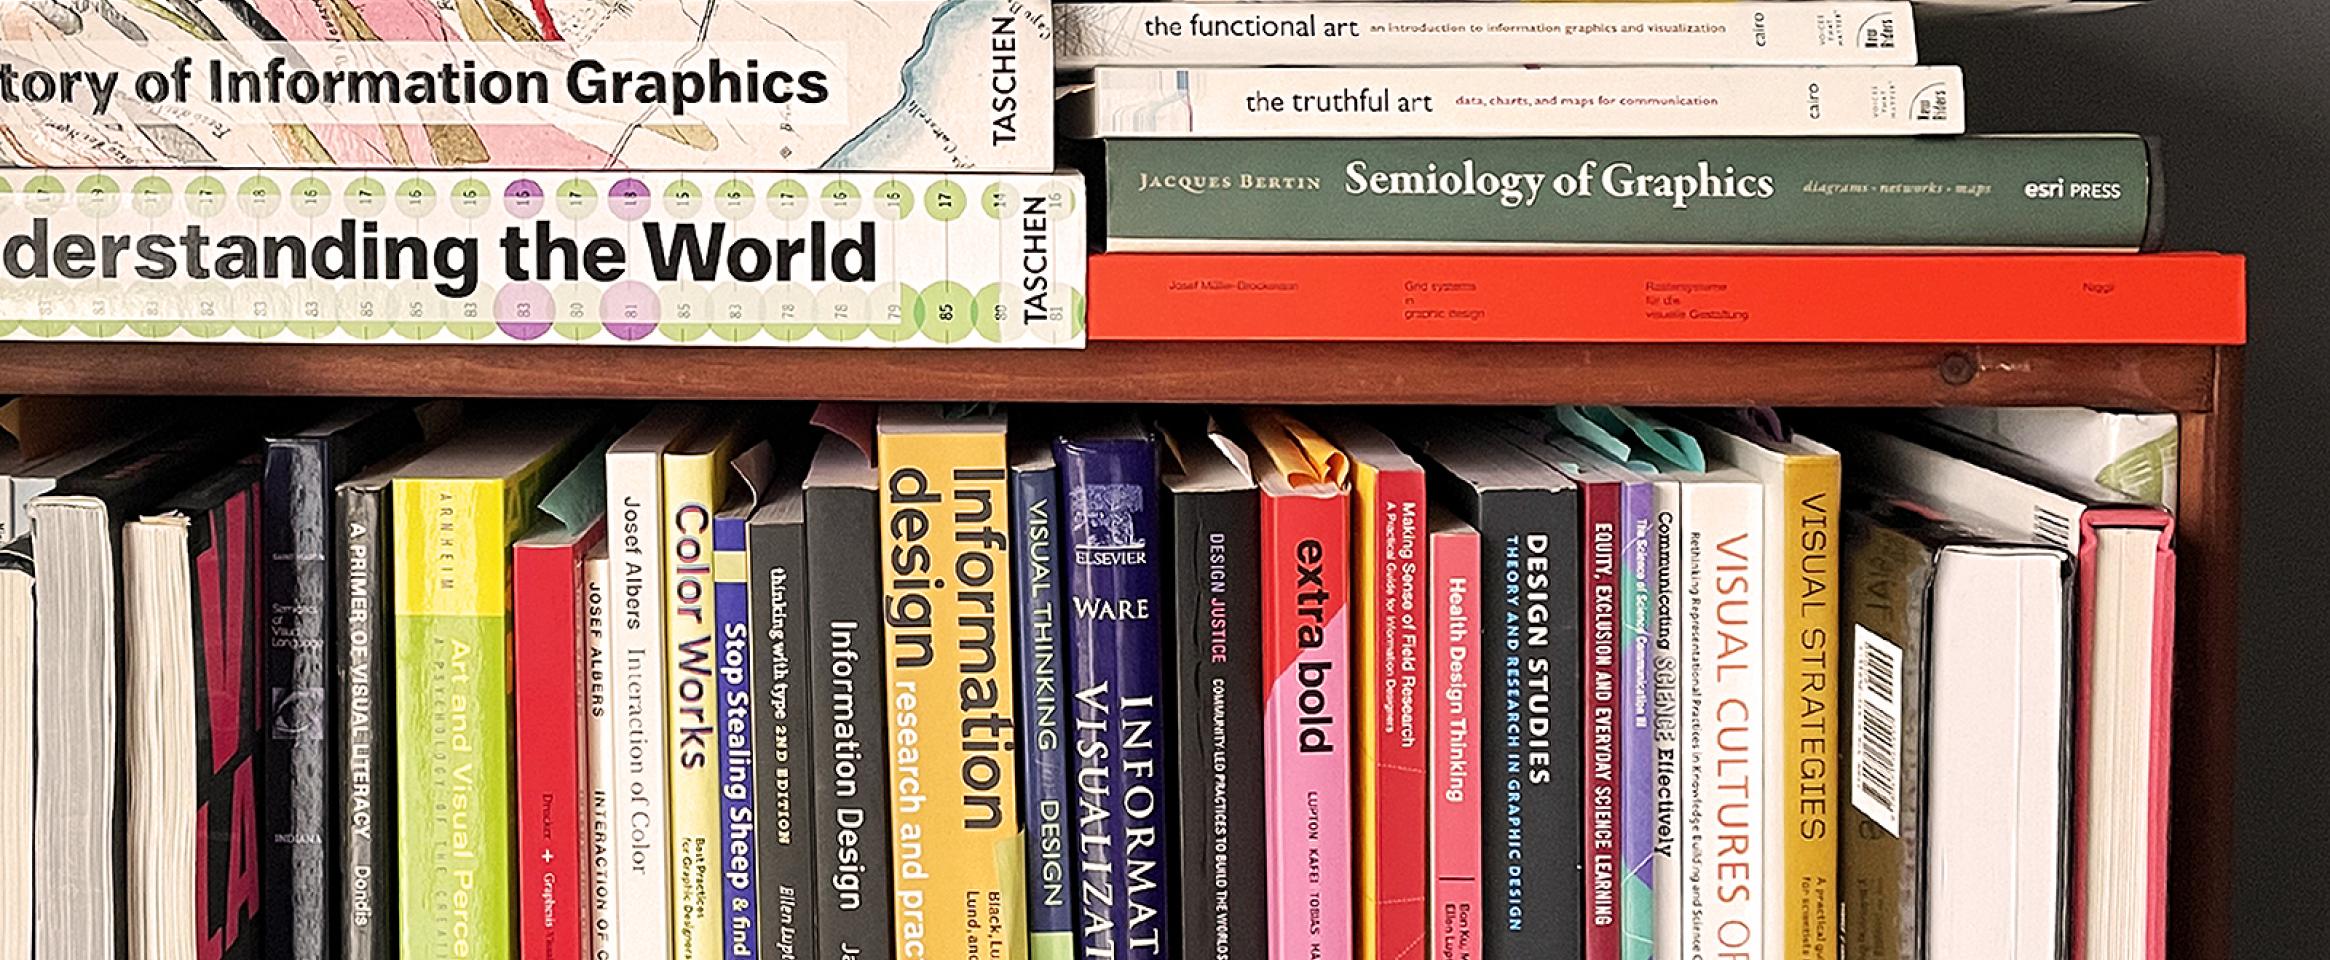 Horizontal photo of a bookshelf with the tops of books visible, along with books stacked atop. The titles all relate to scientific illustration.